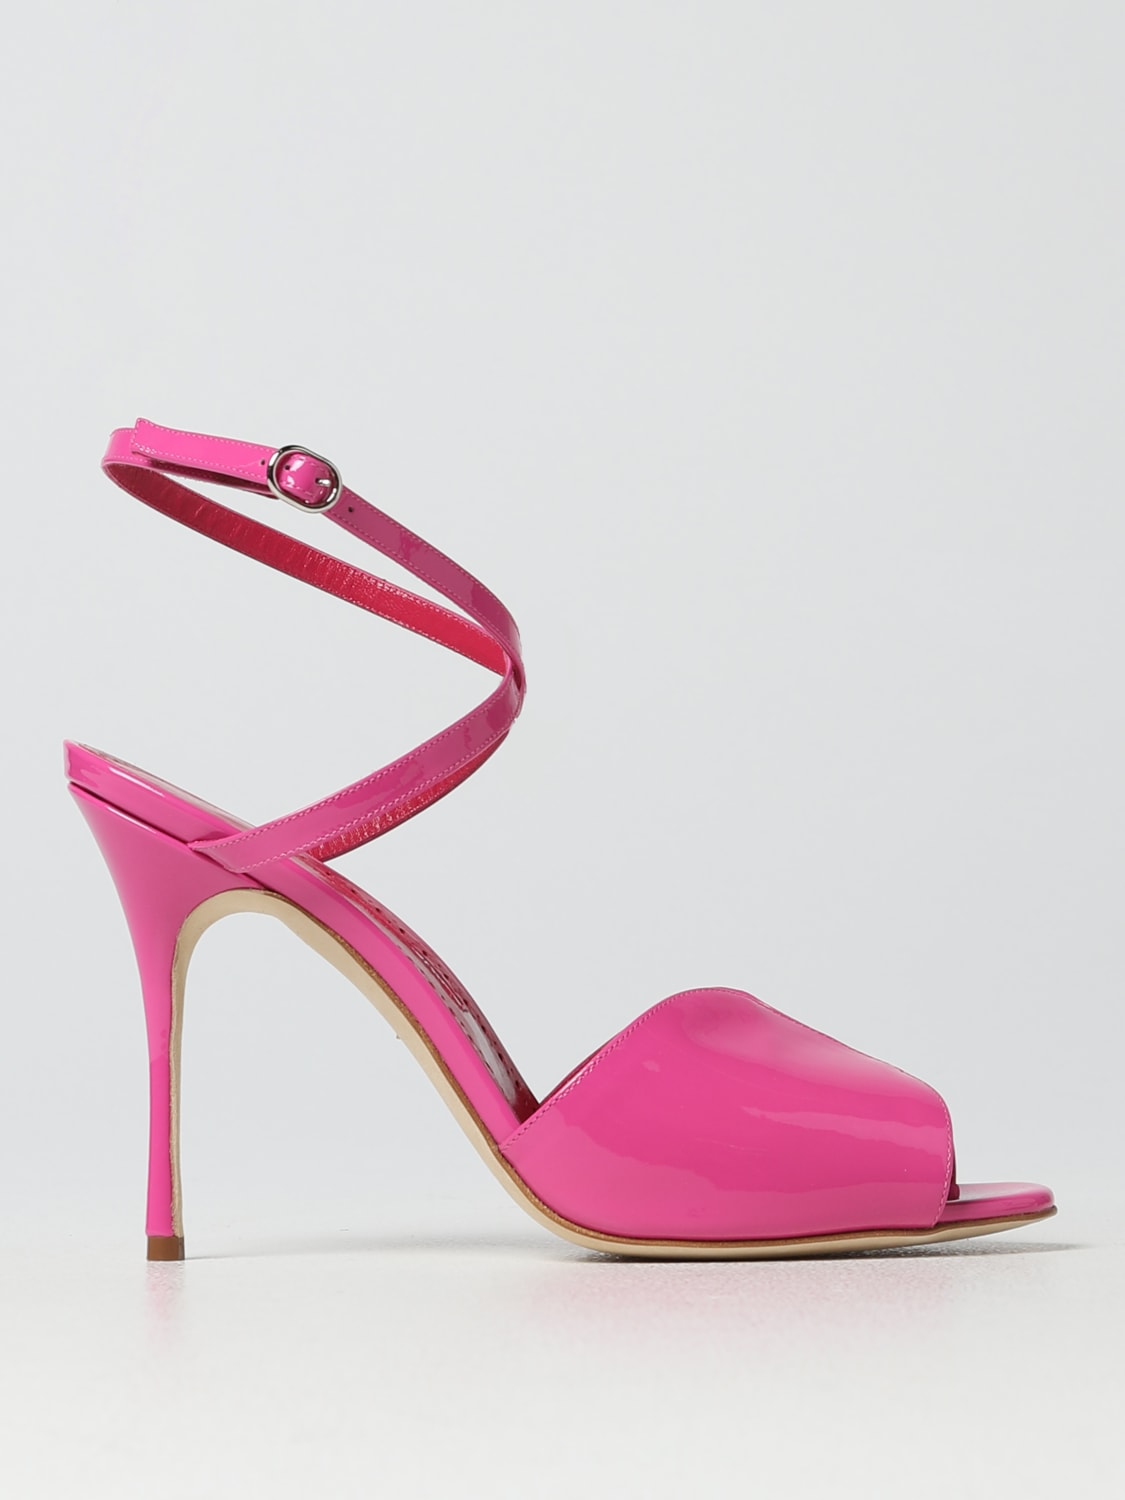 MANOLO BLAHNIK: Hourani sandals in patent leather - Pink | Manolo ...